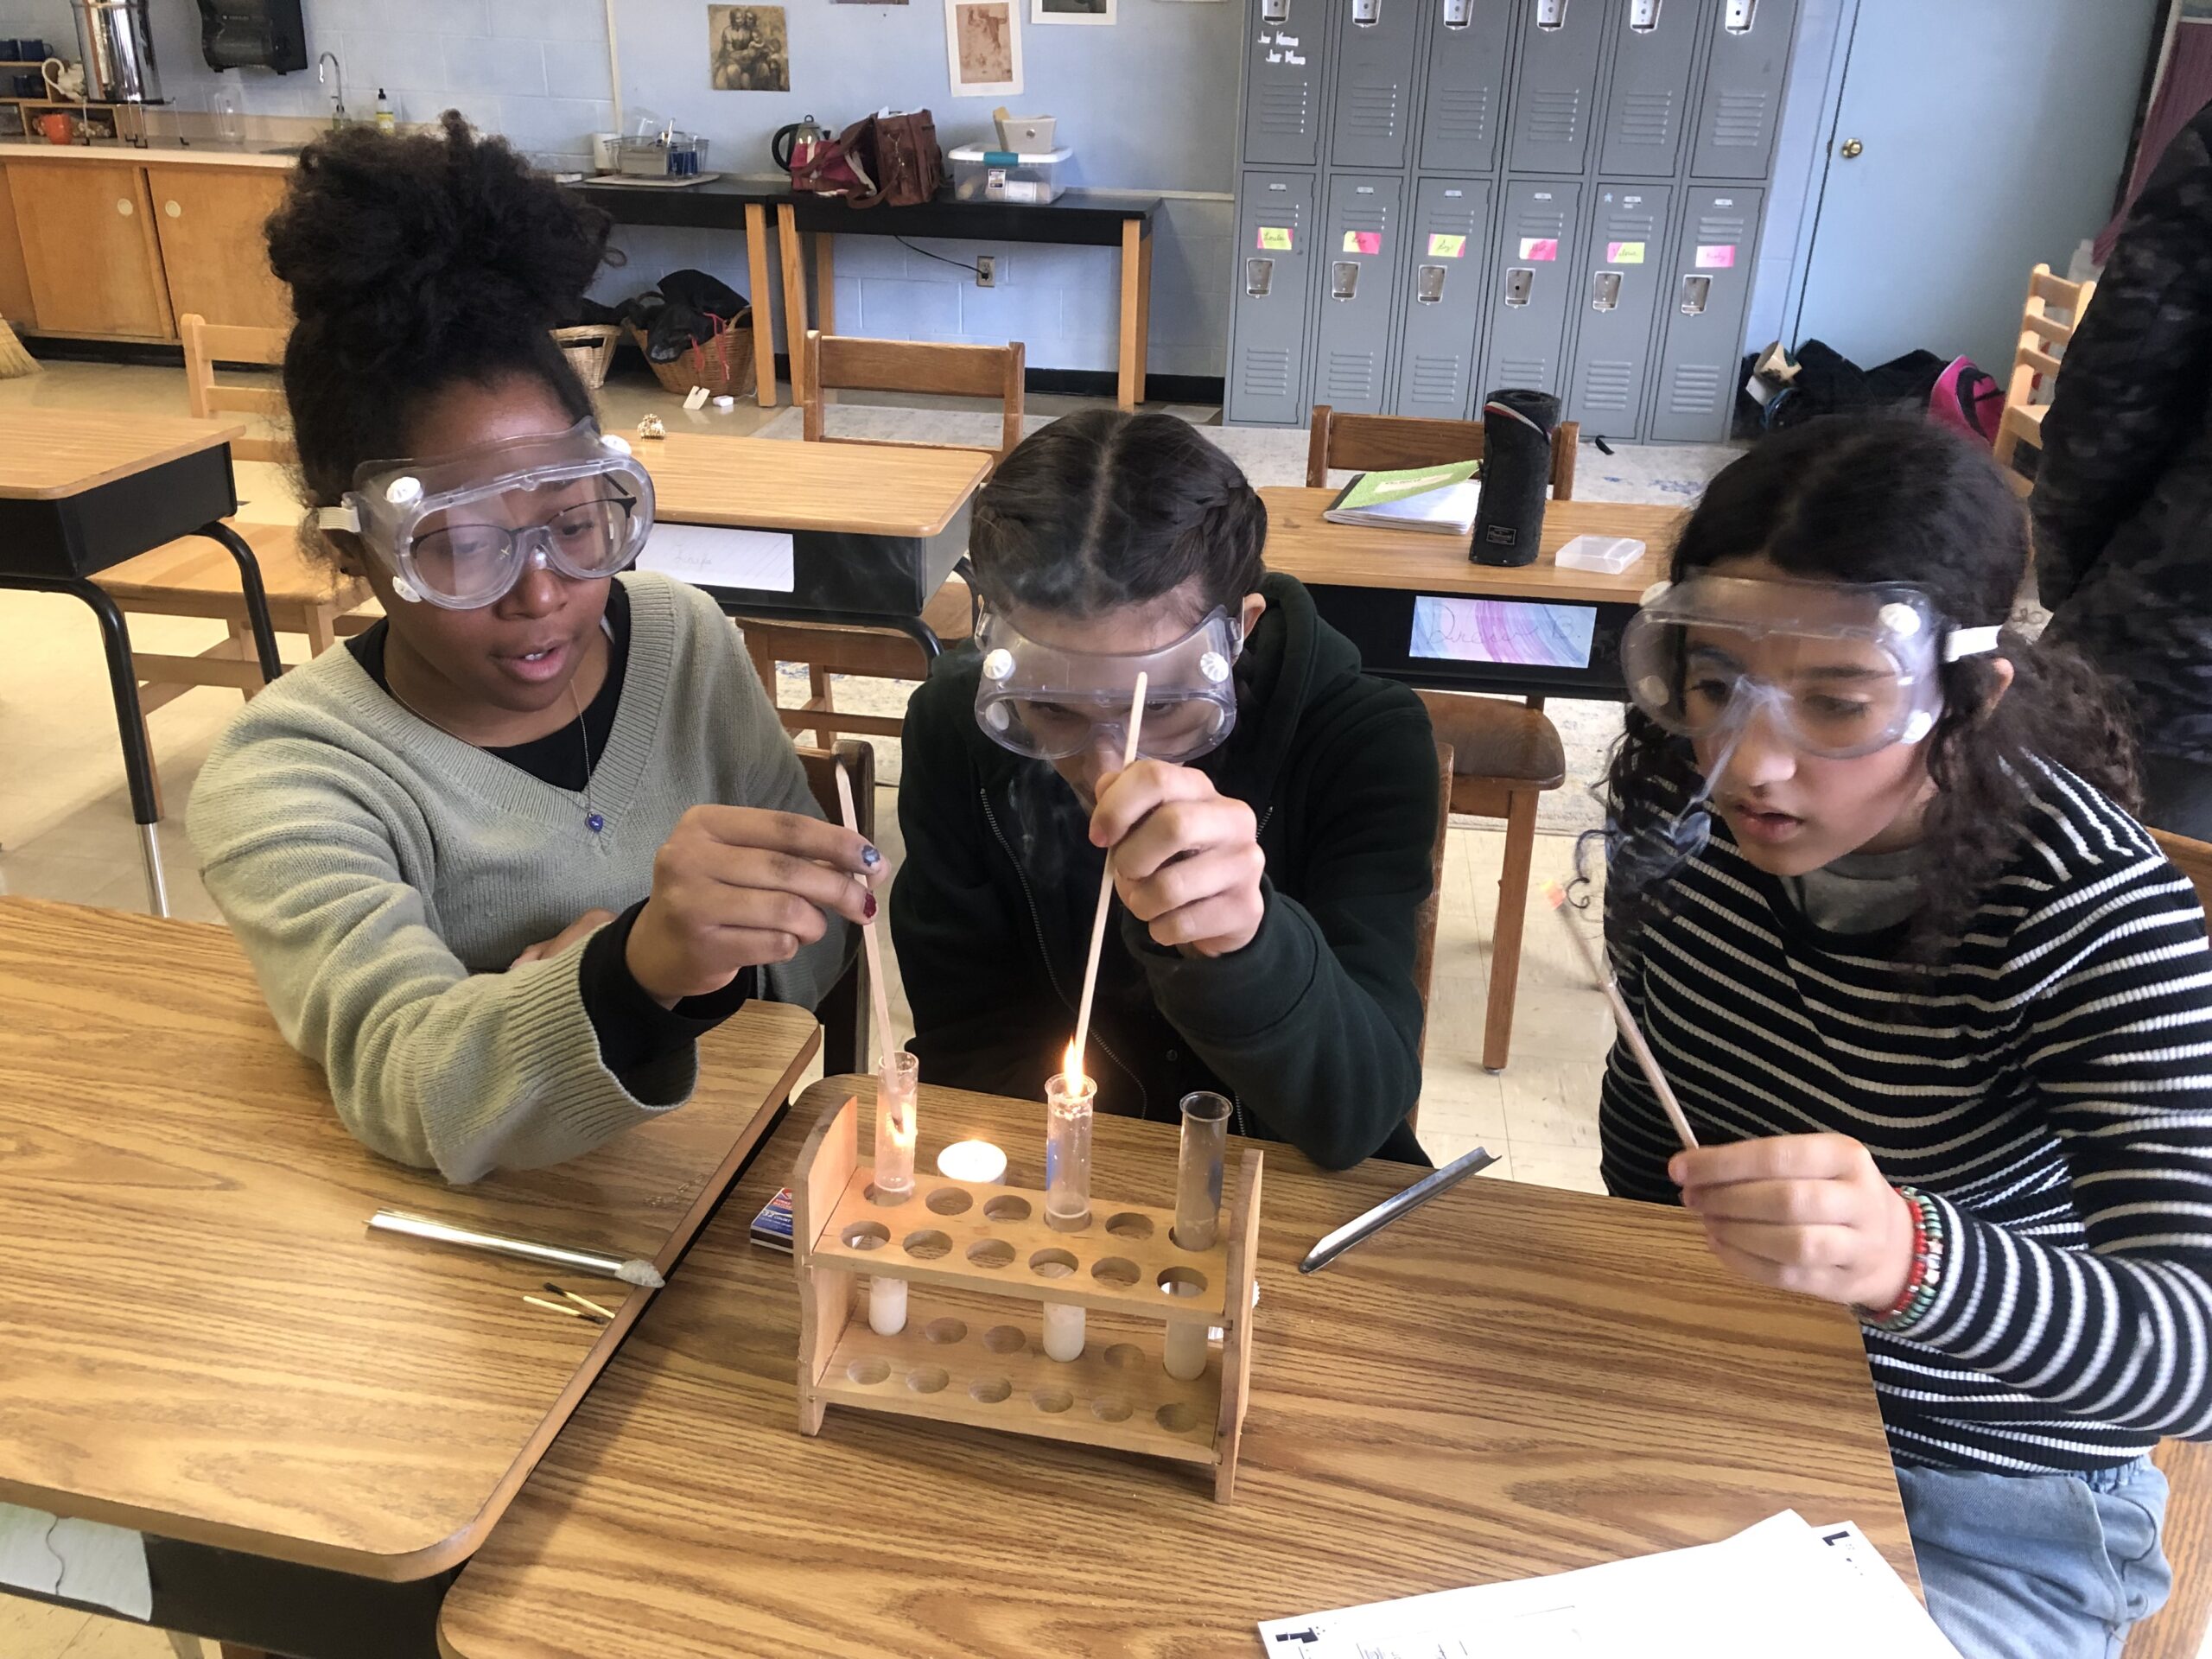 7th grade chemistry offers students a chance to objectively observe forces of nature, such as combustion!